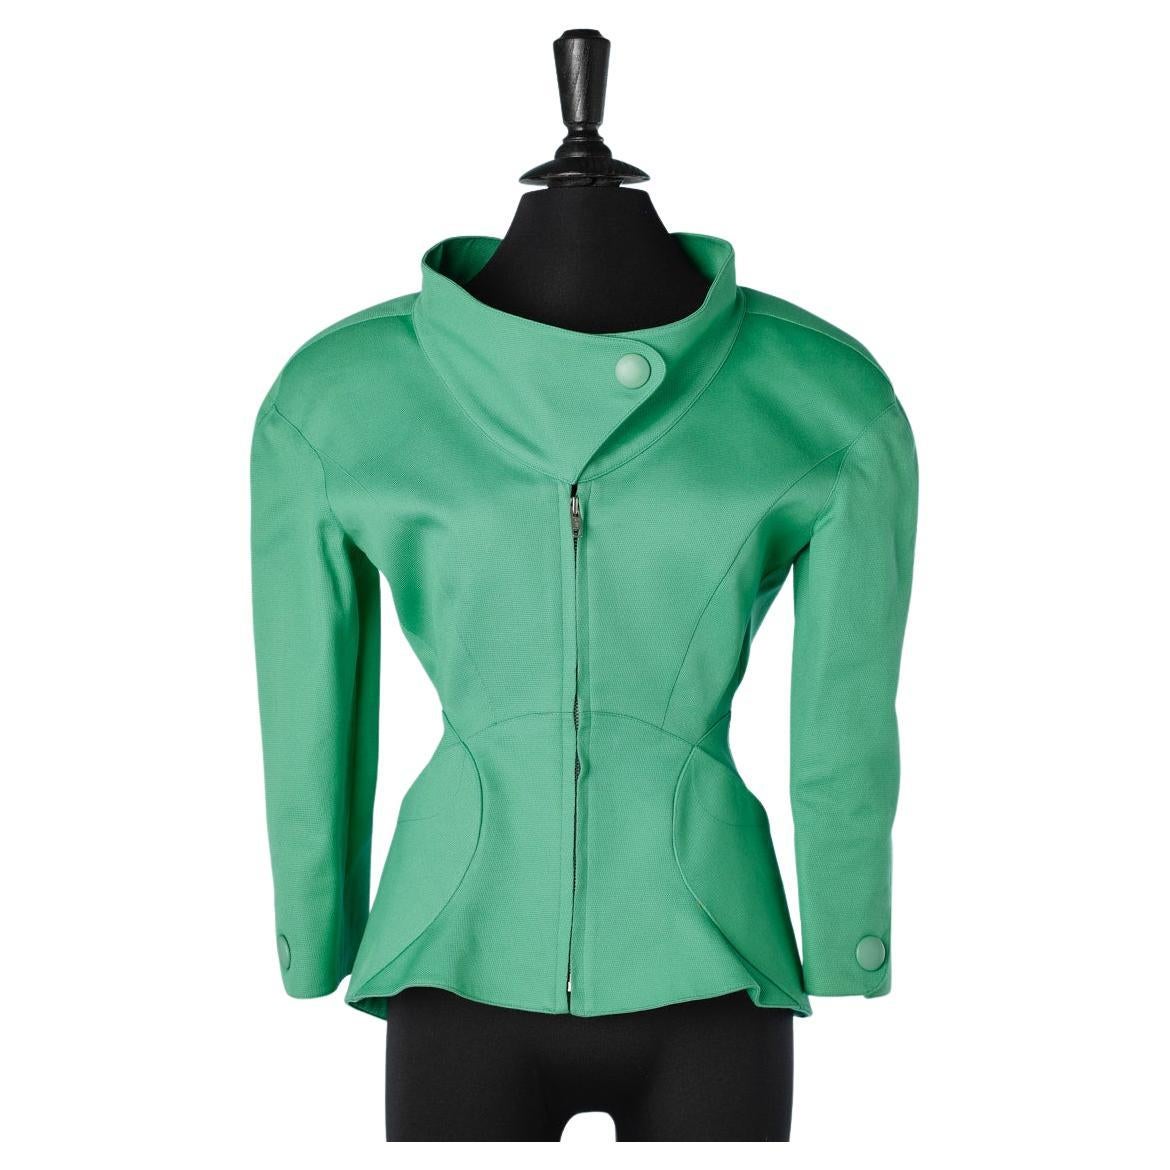 Green cotton jacket wit zip in the middle front and snaps Thierry Mugler  For Sale